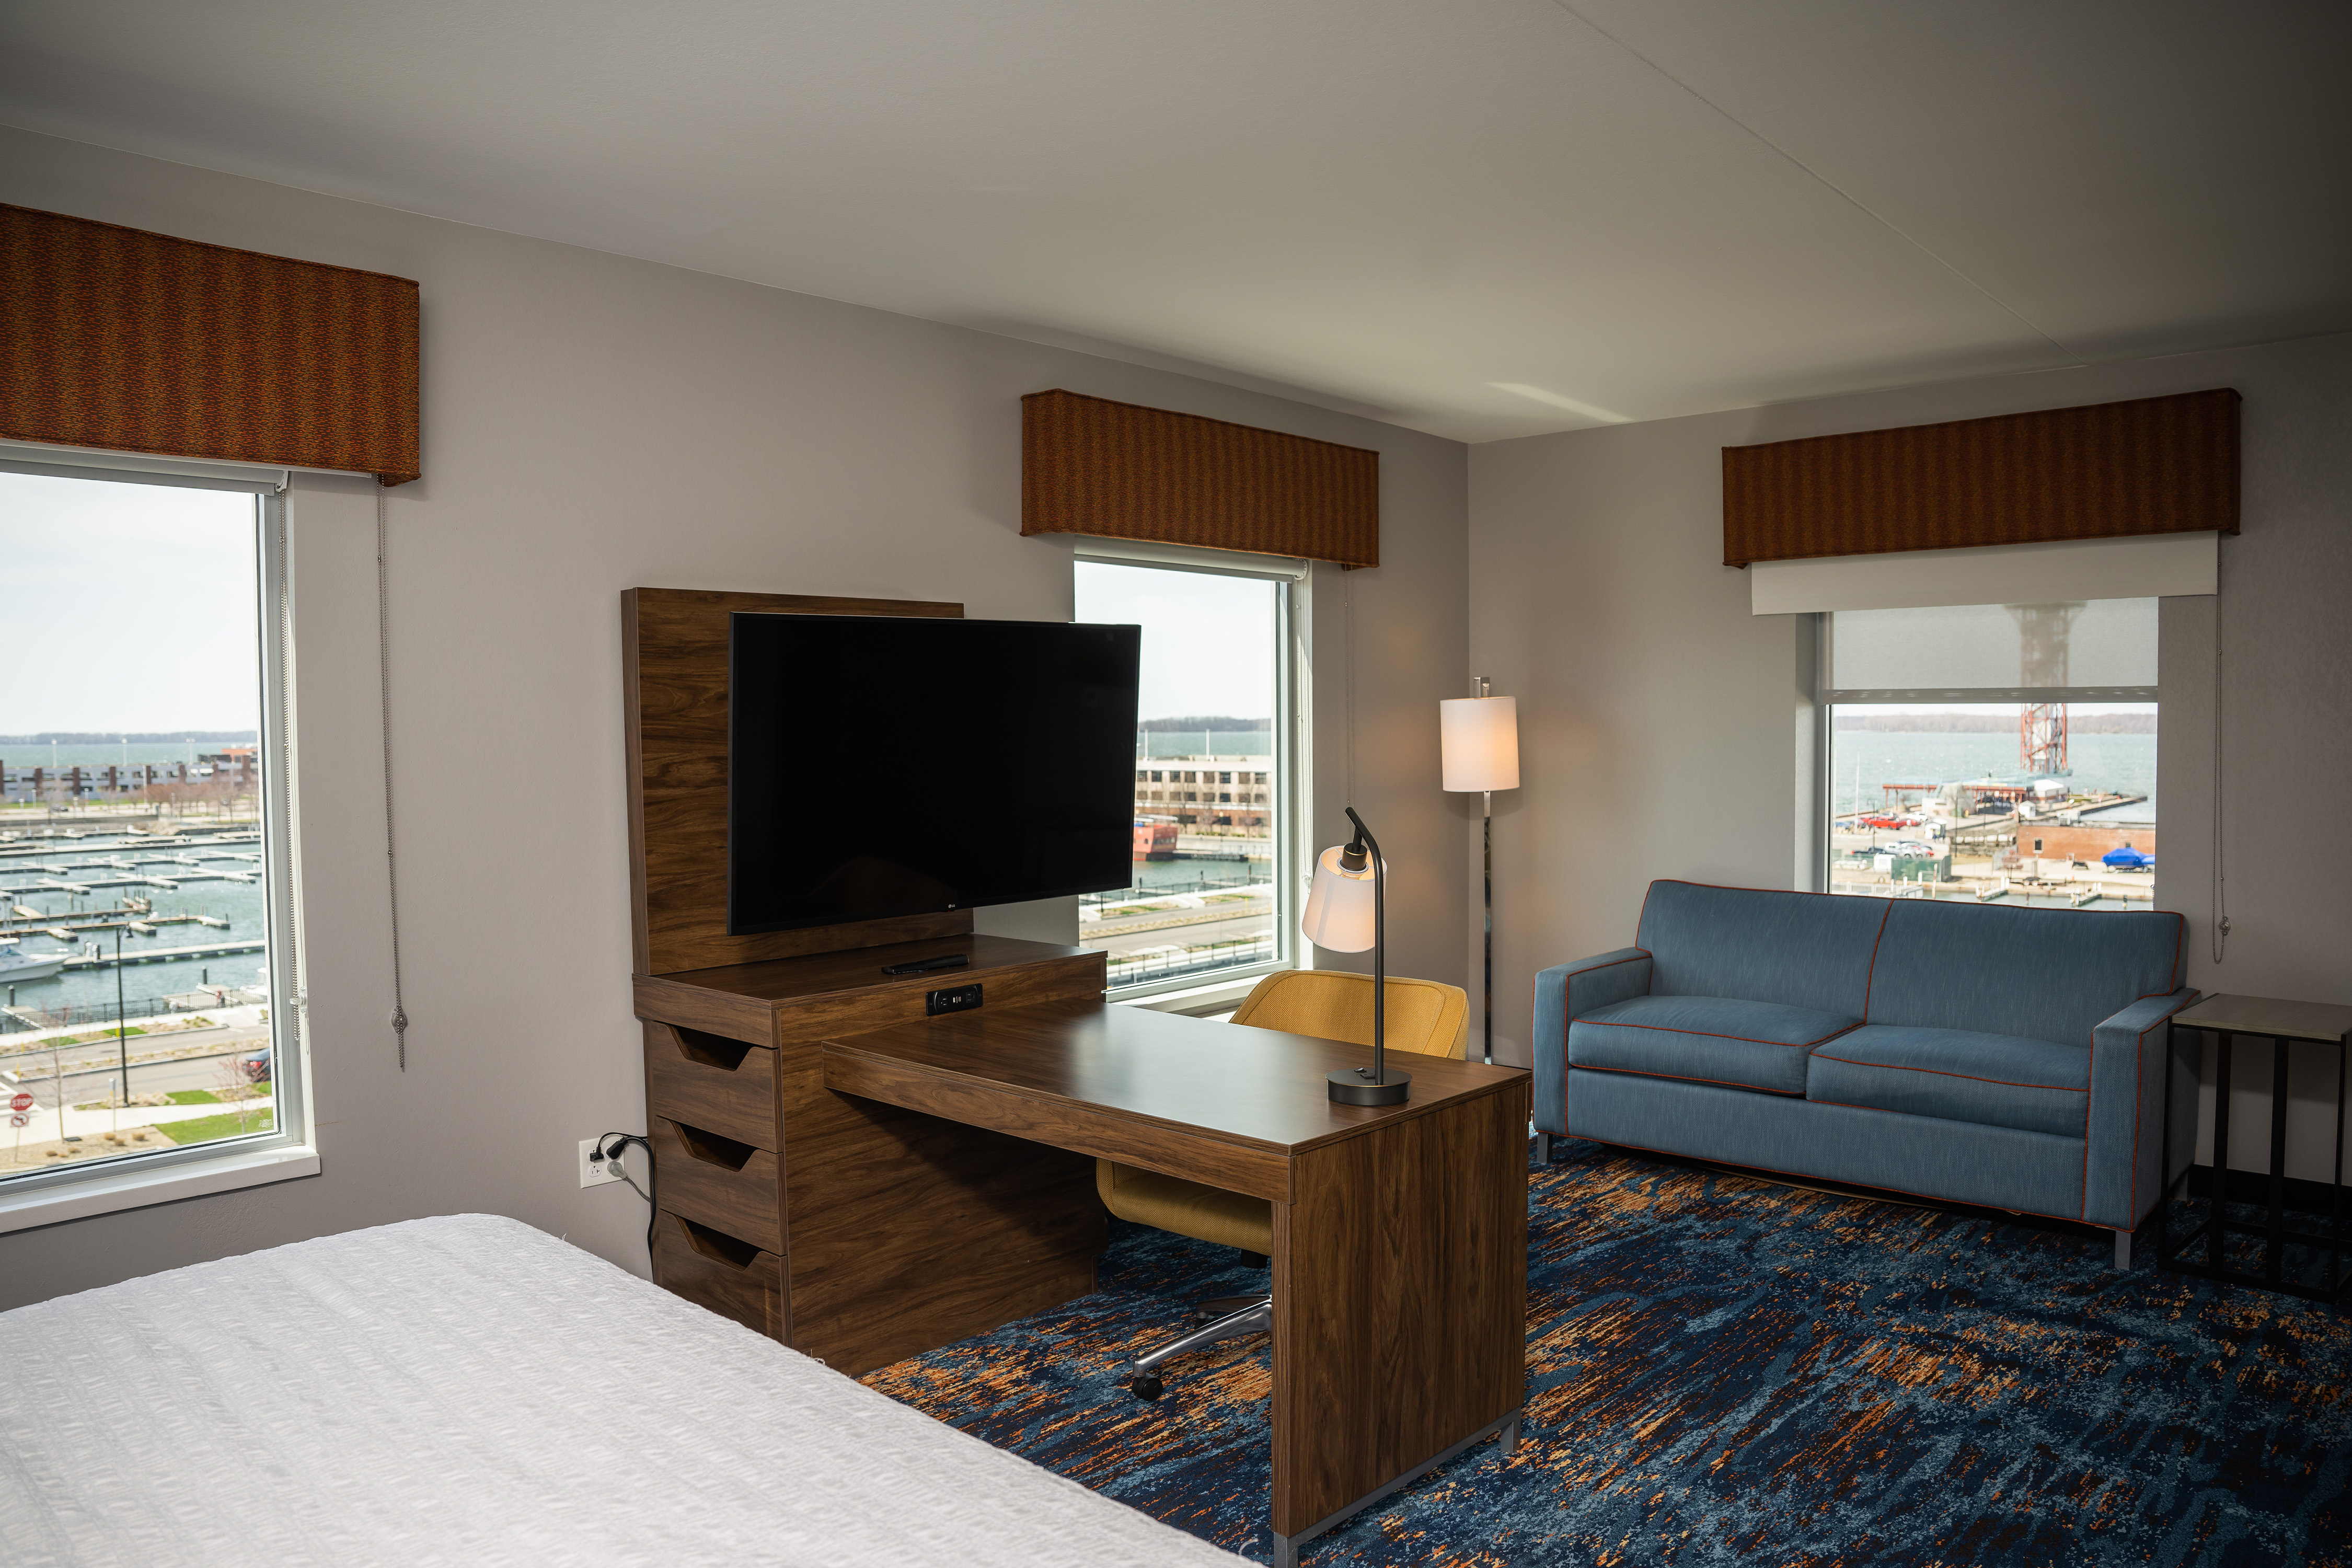 Desk, HDTV, Sofa and Large Bed in a Room with Marina View